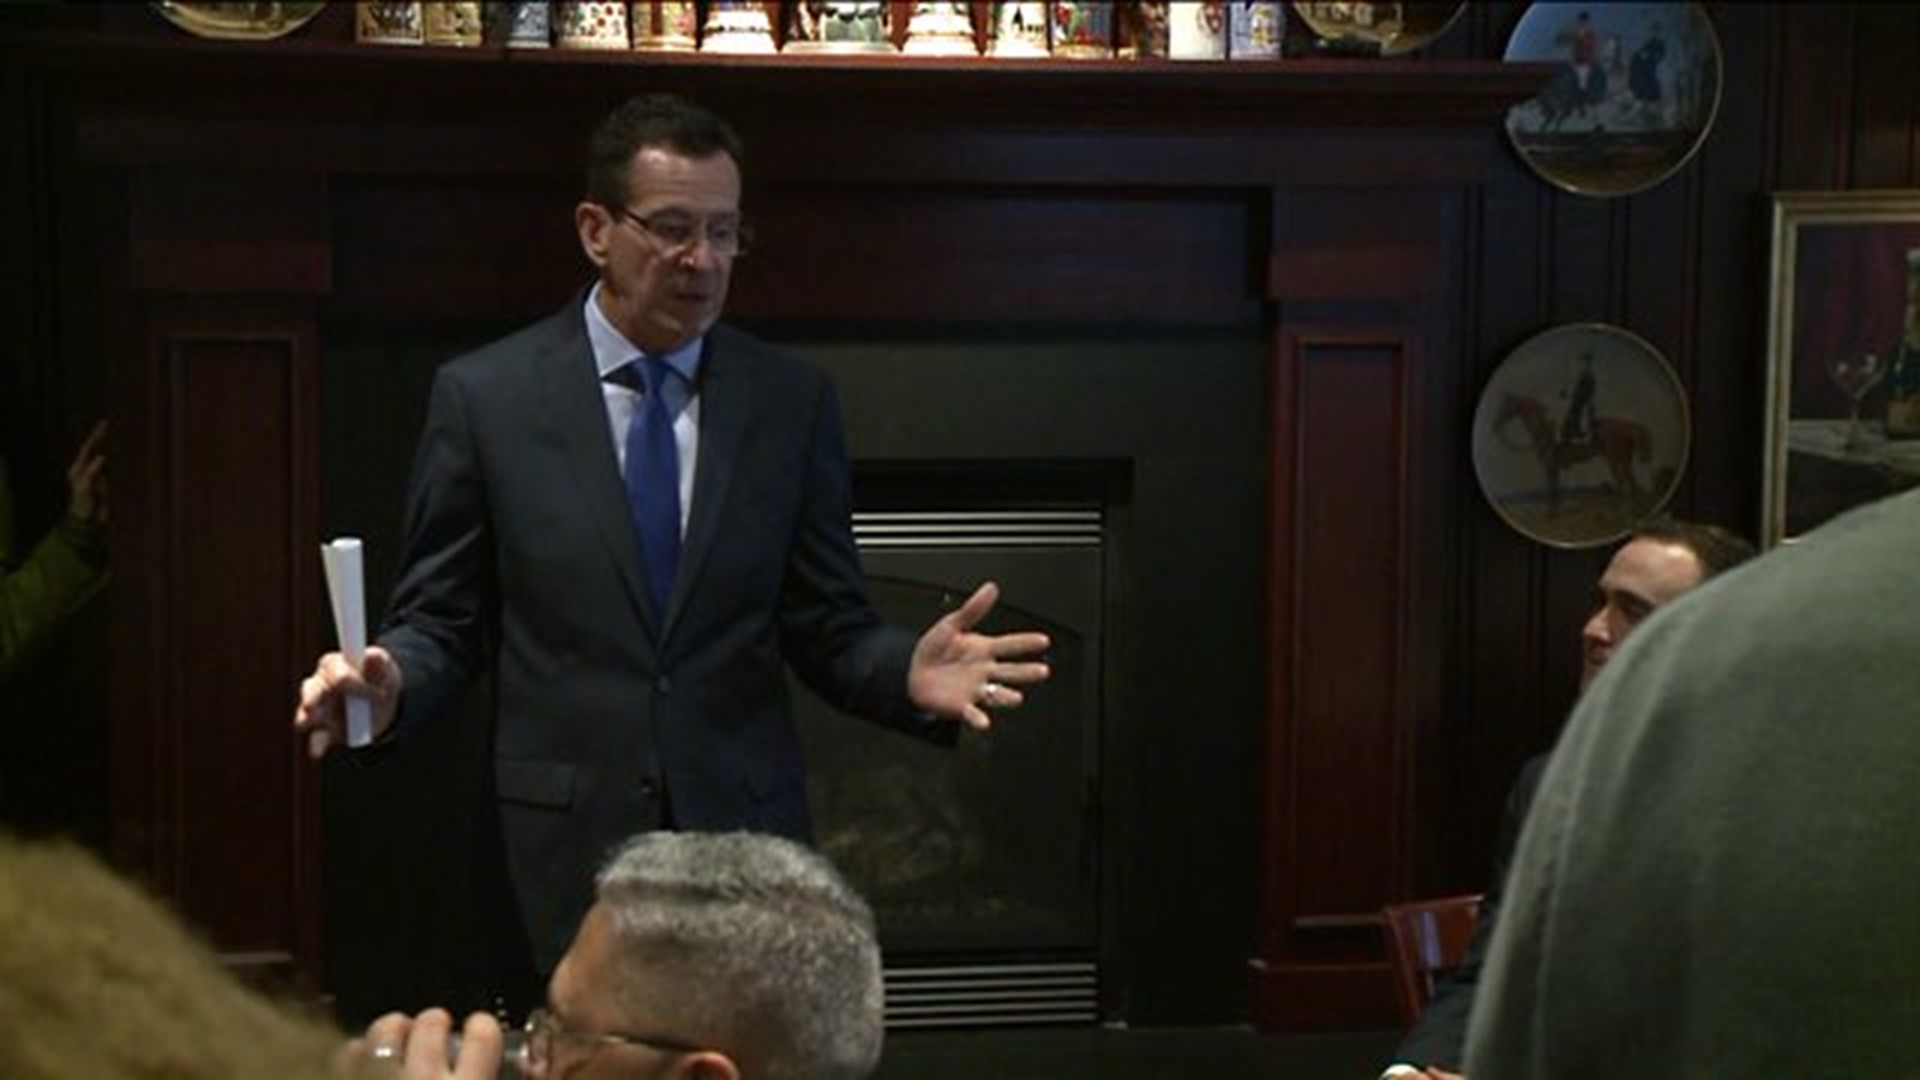 Malloy stumps for Clinton in Springfield